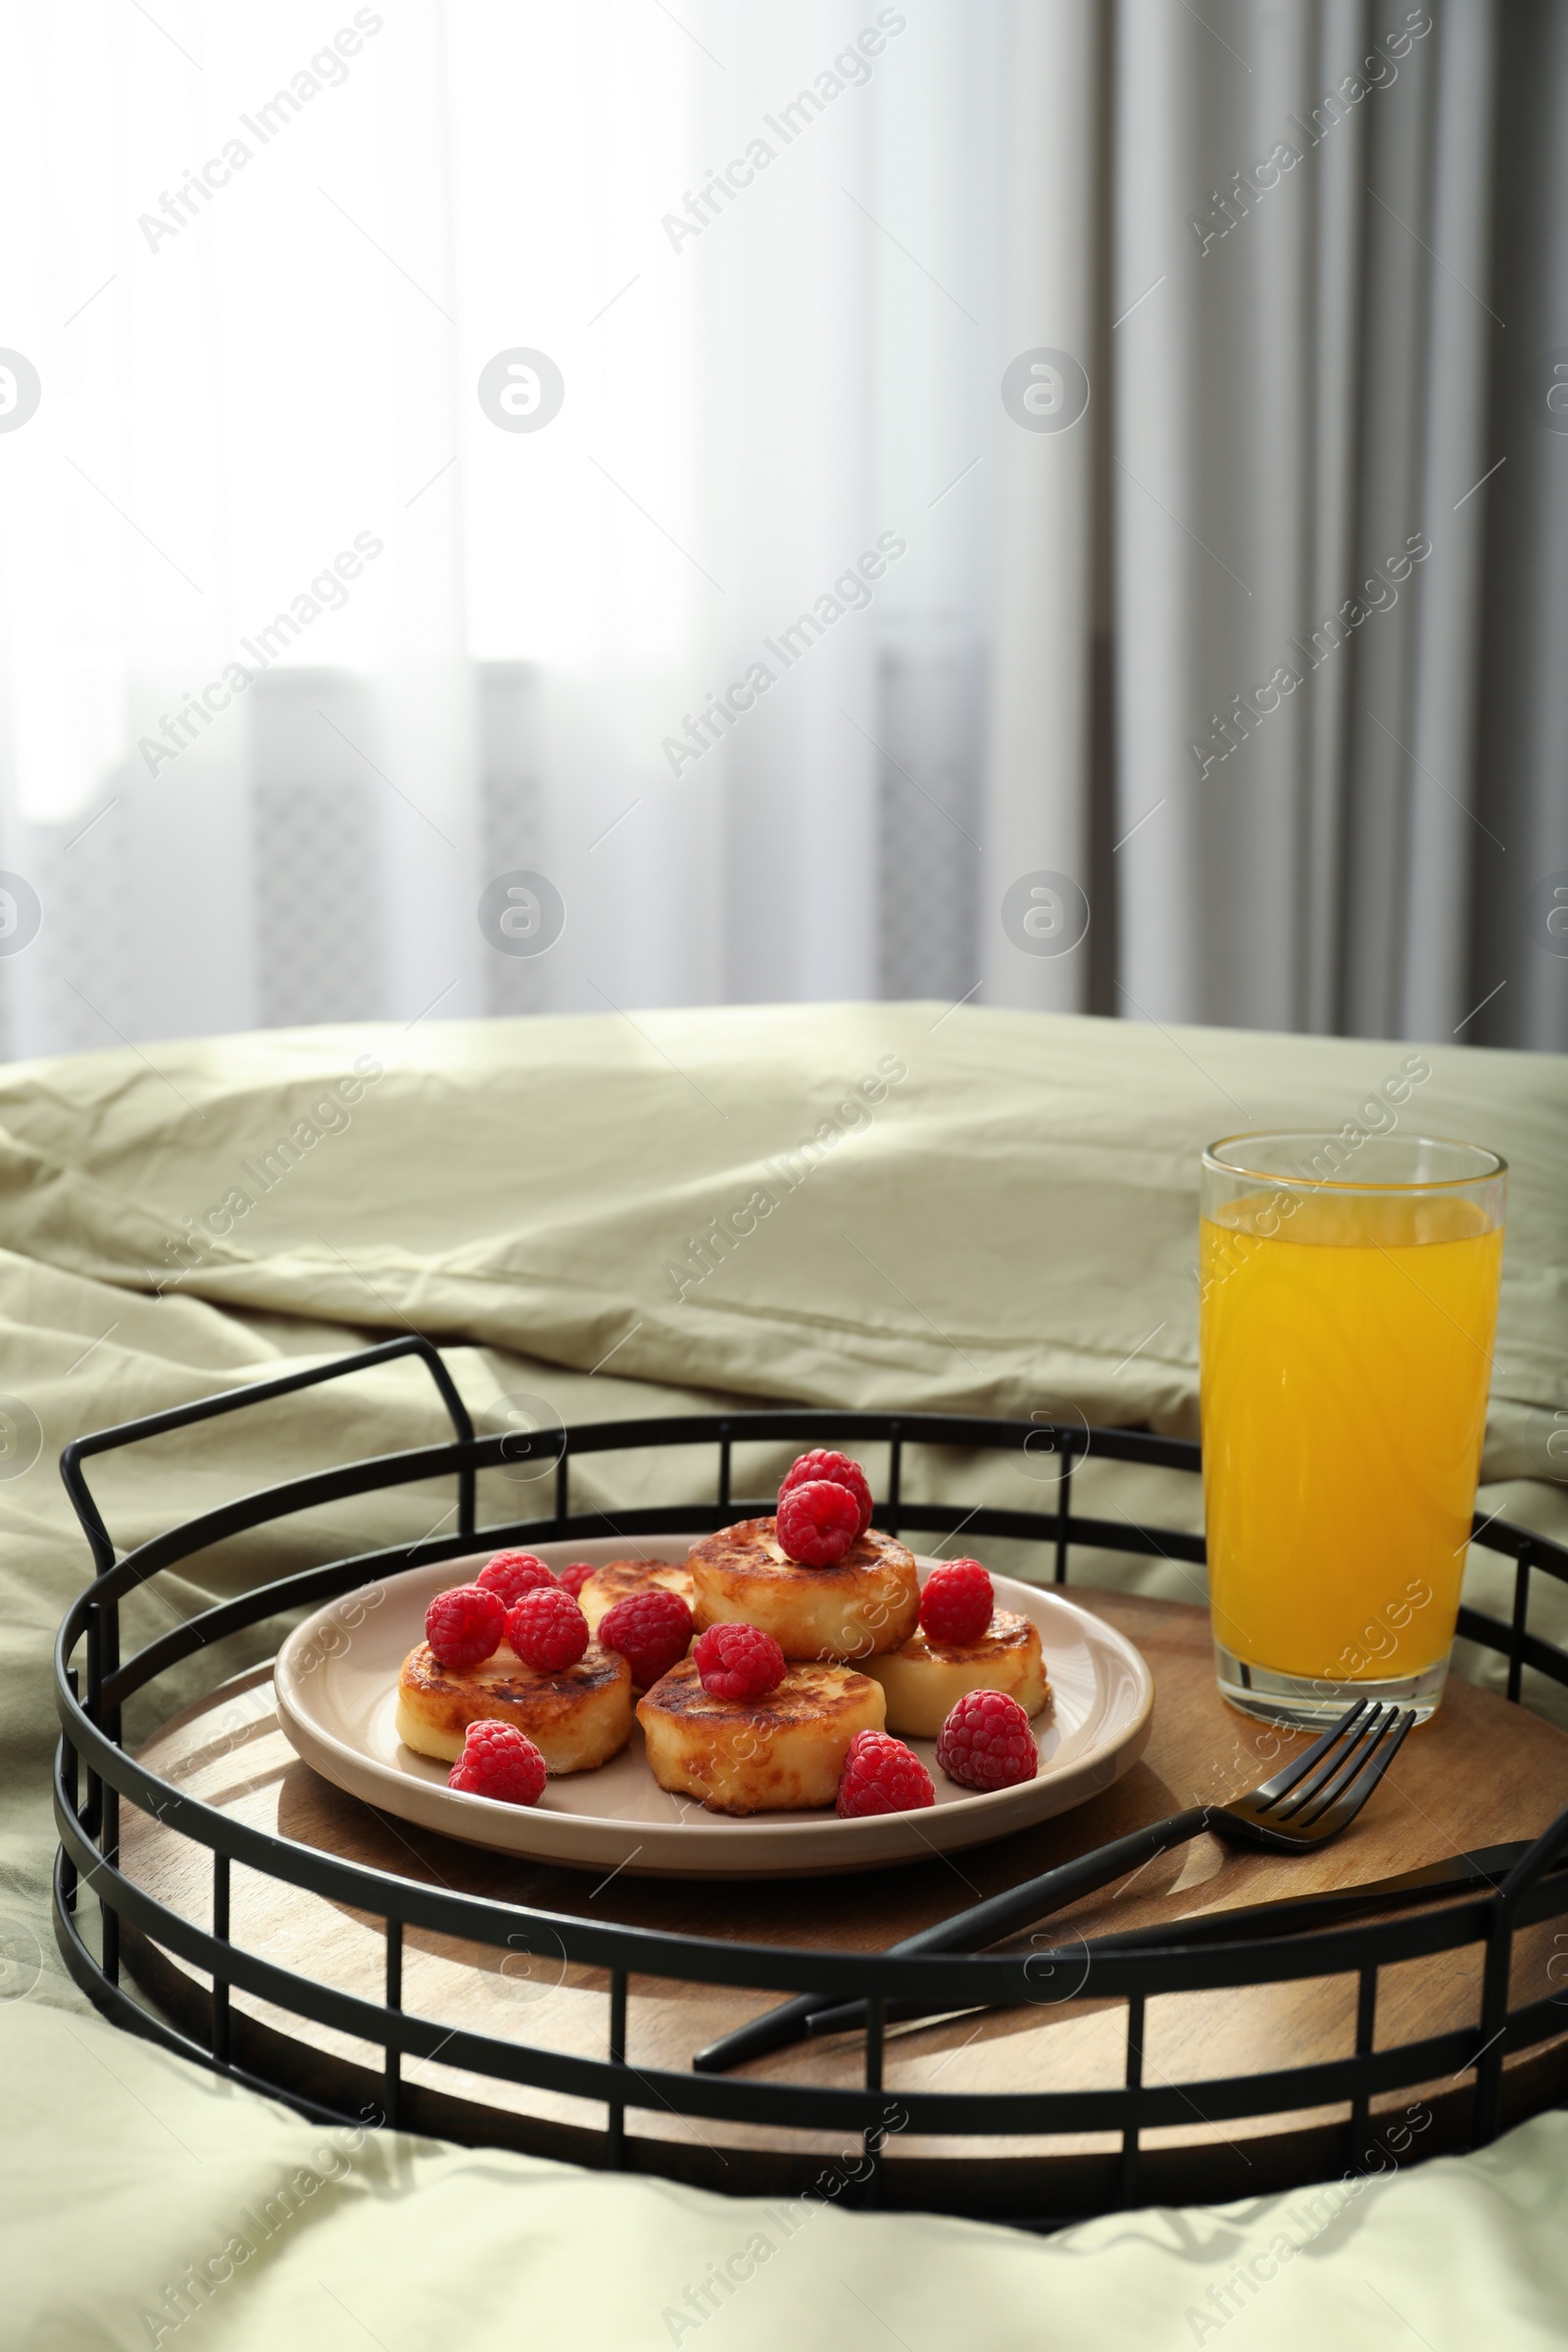 Photo of Tasty breakfast served in bedroom. Cottage cheese pancakes with fresh raspberries and juice on tray